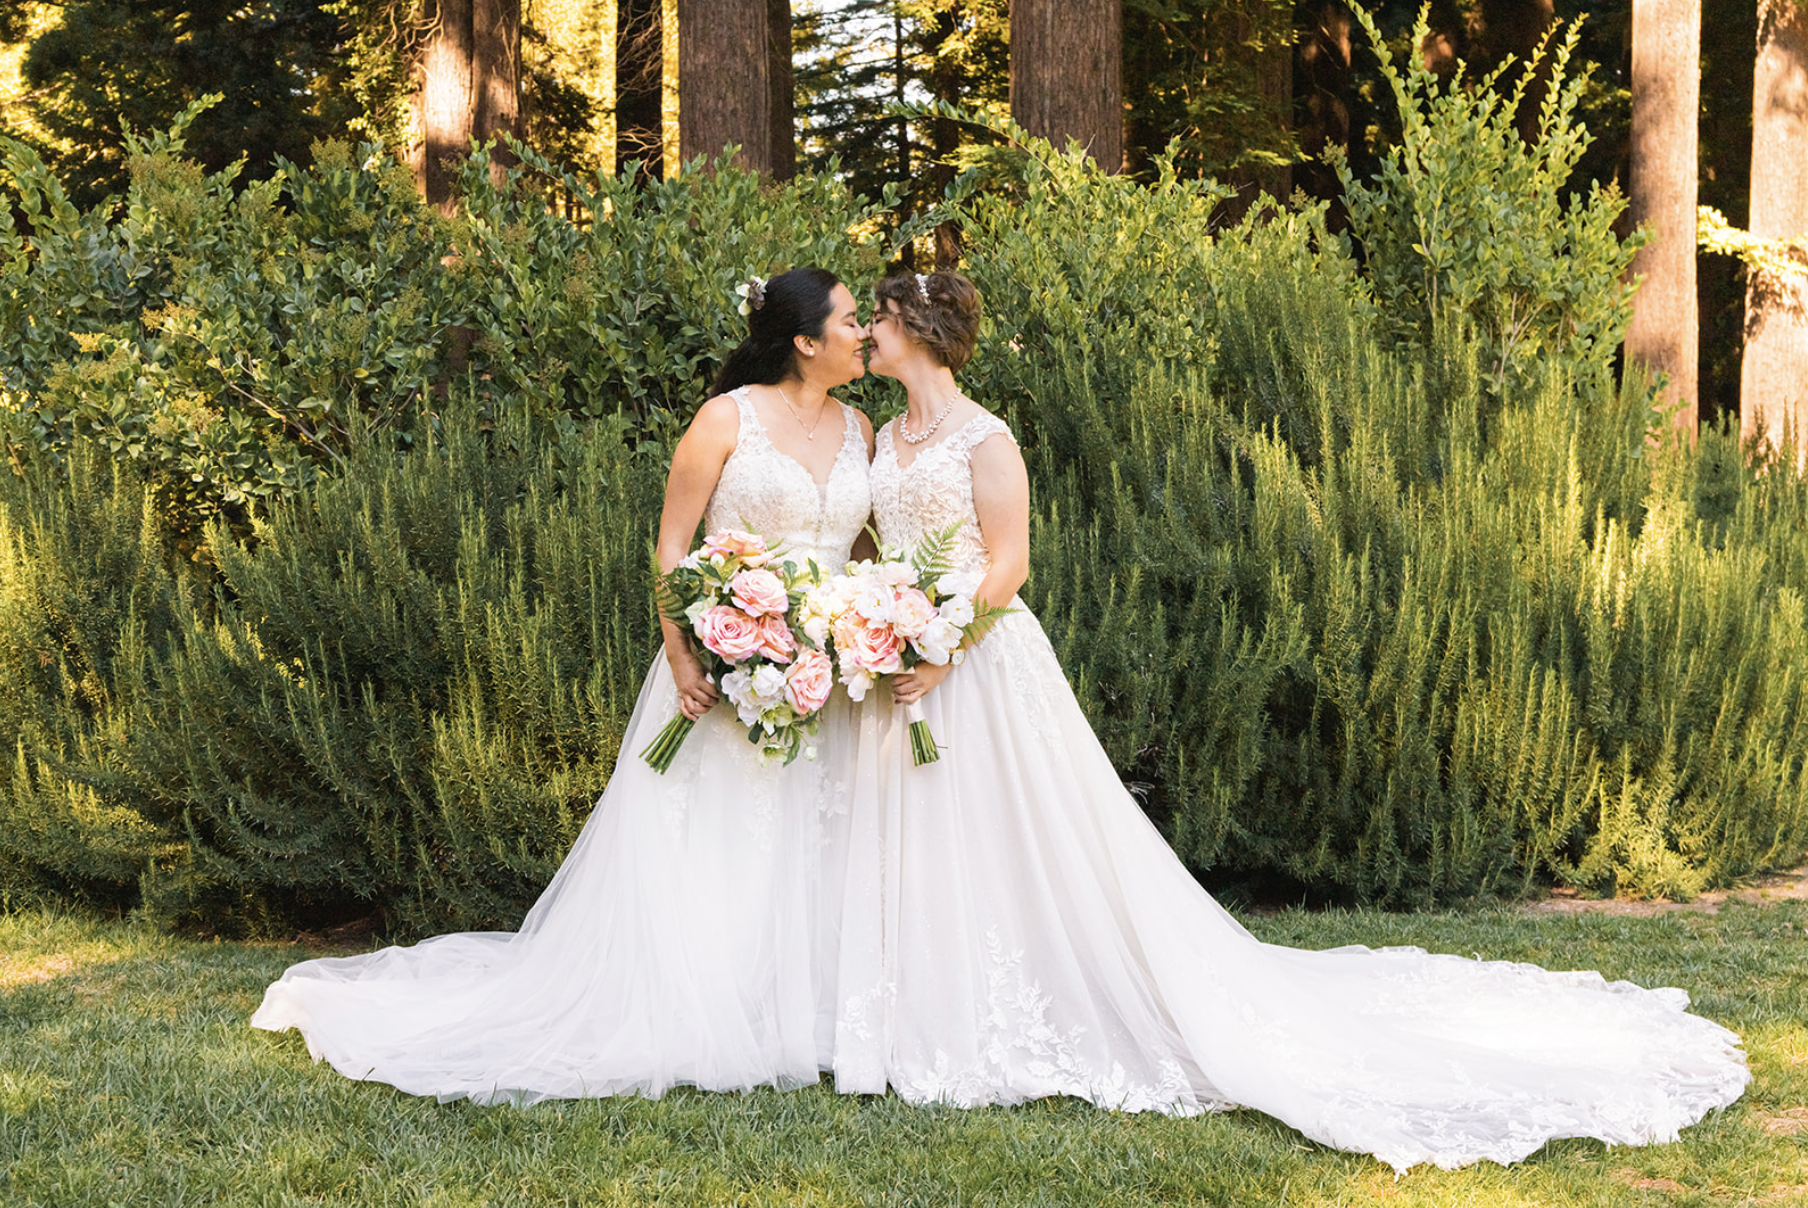 two brides lean in for a kiss at their wedding